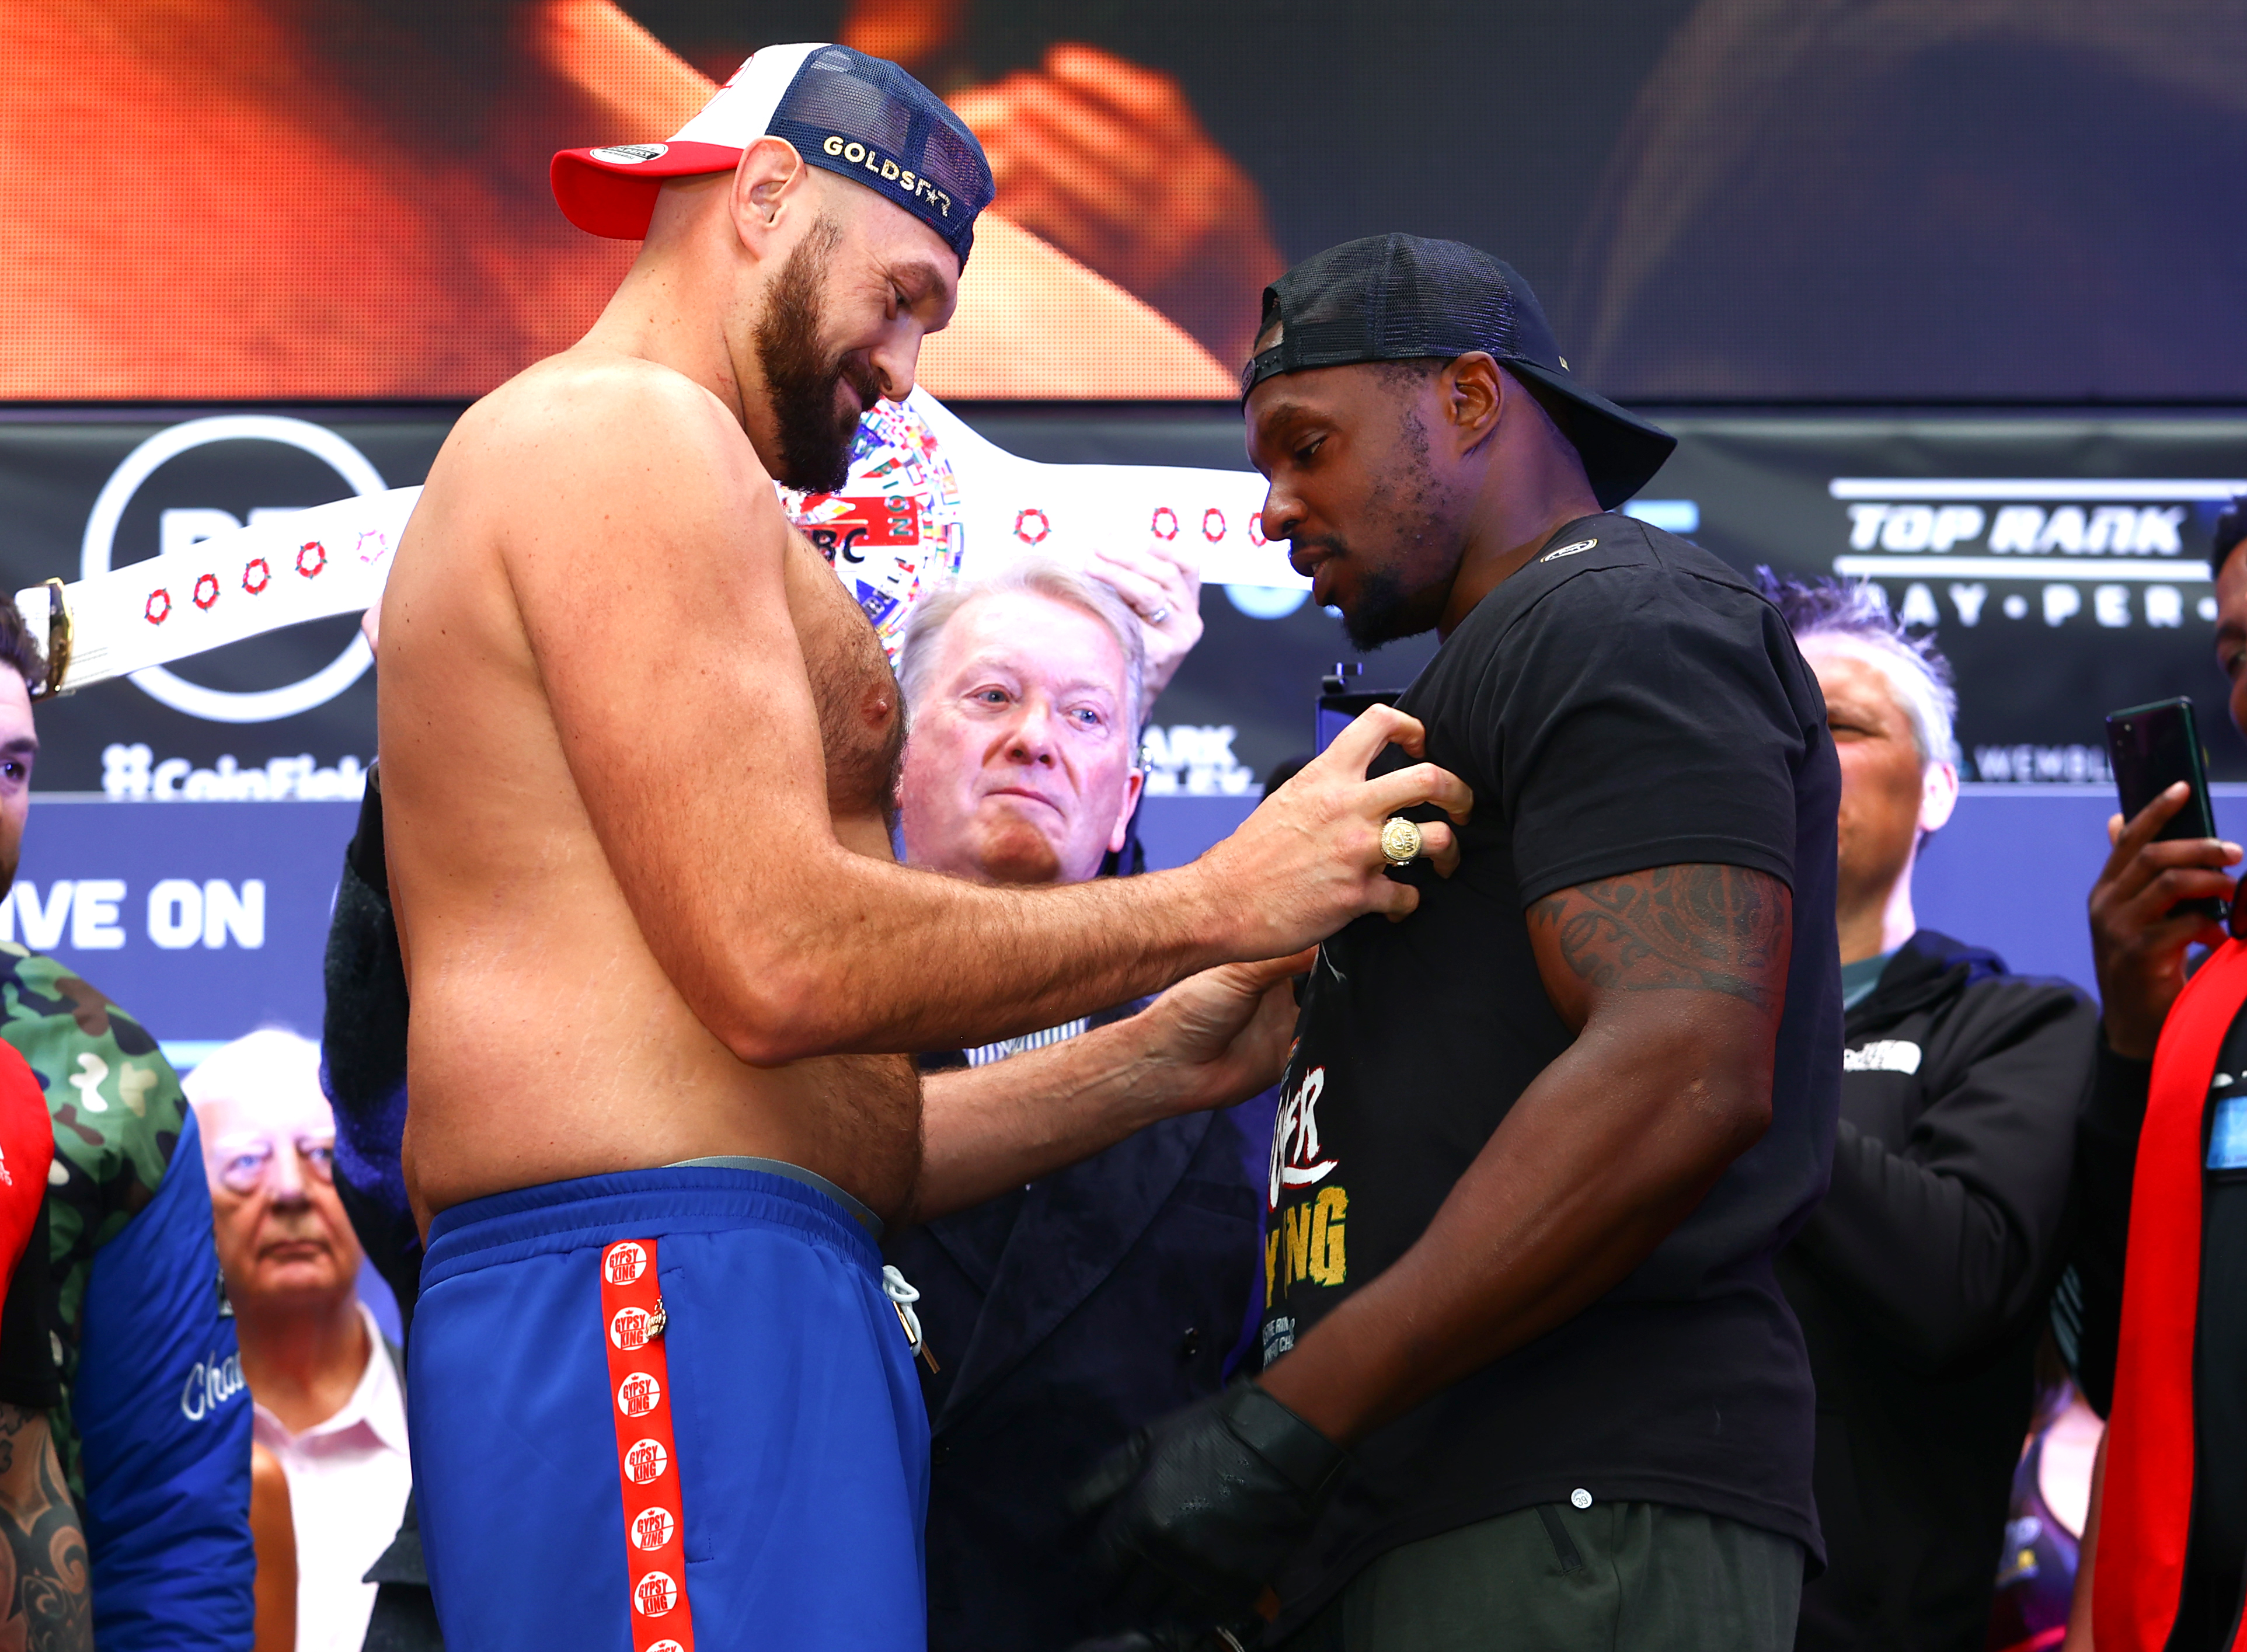 Weigh-ins go down in dance battle as Tyson Fury stays light for title fight against Whyte